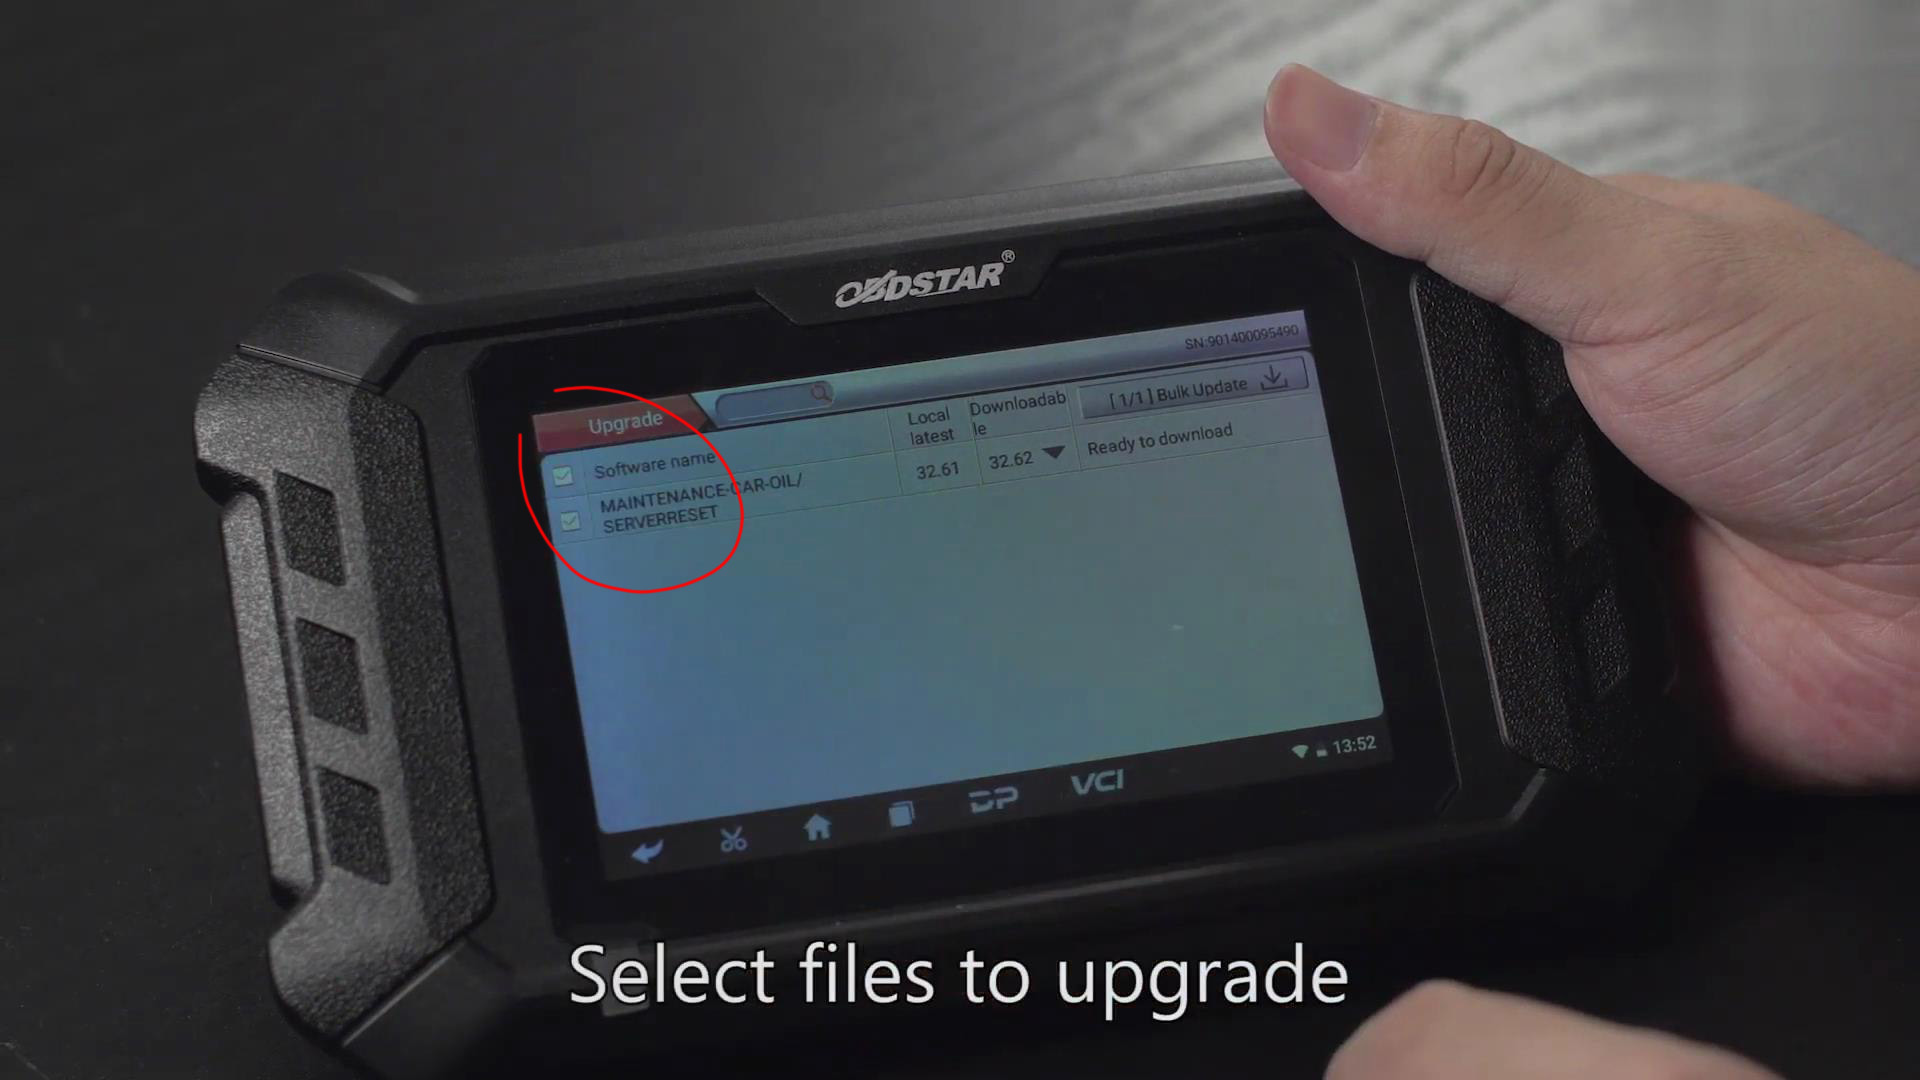 How-to-Register-&-Upgrade-Obdstar-X300-MINI-Scan-Tool-8